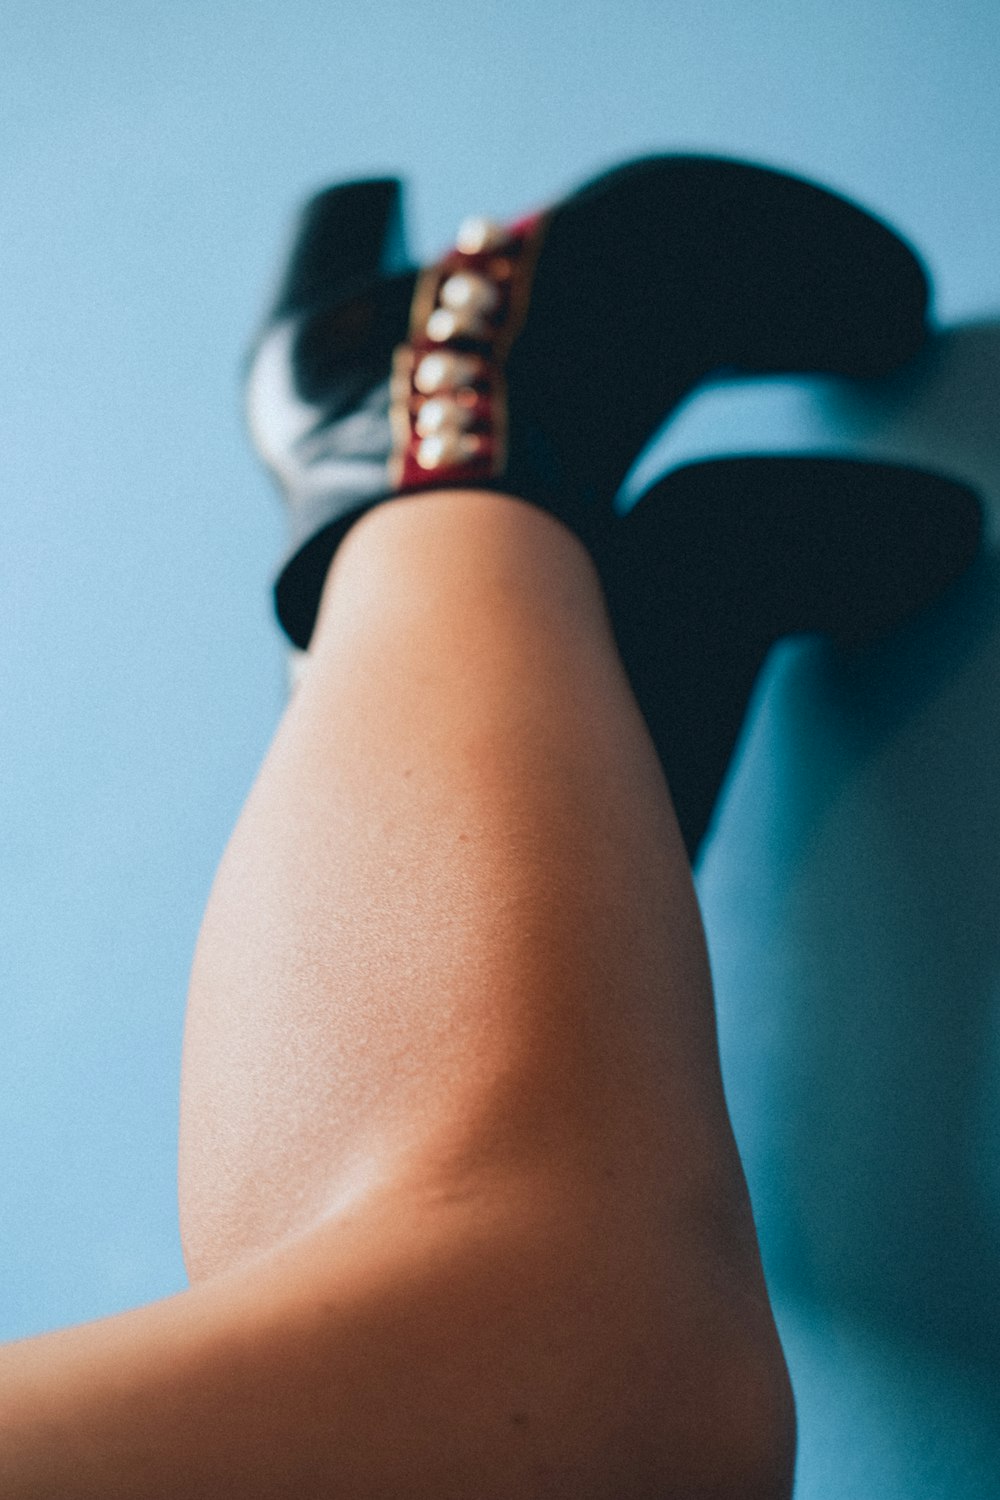 a close up of a person's legs wearing high heels